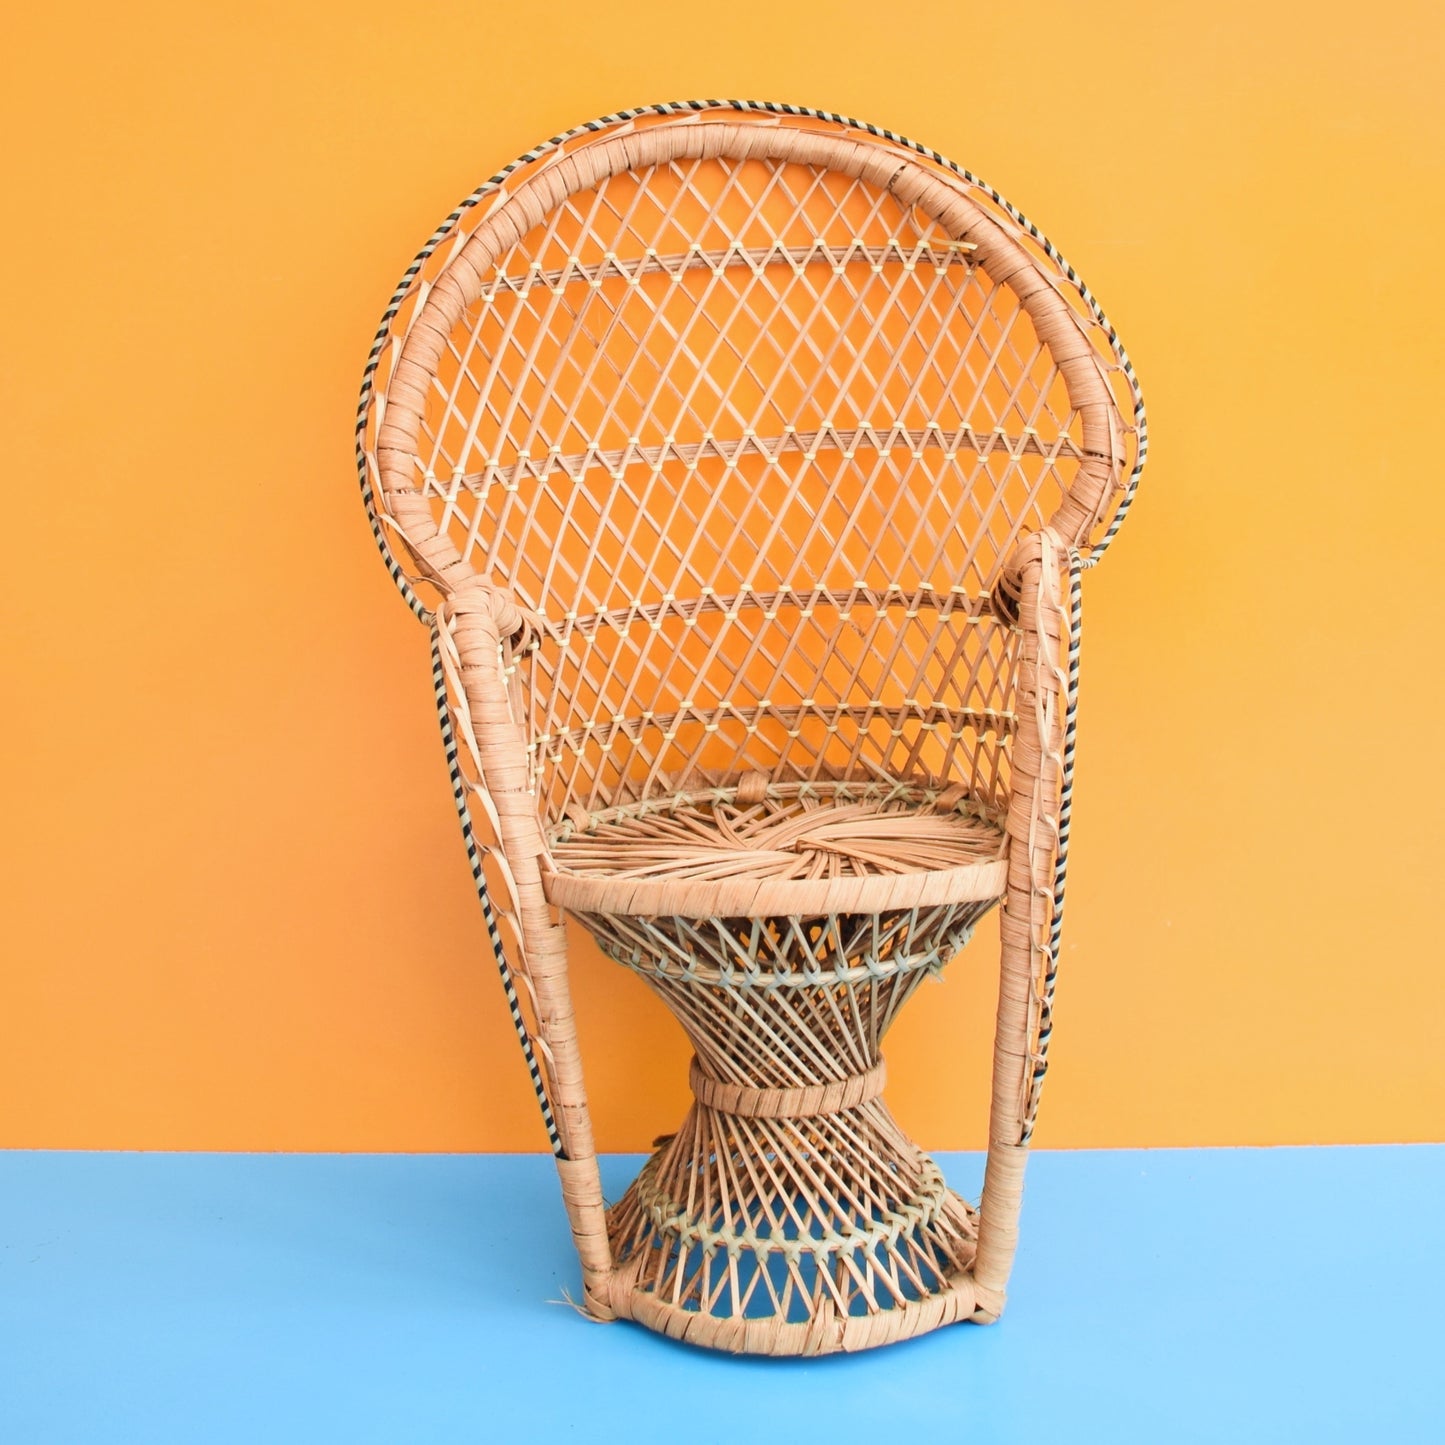 Vintage 1970s Mini Wicker Peacock Chair / Plant Stand